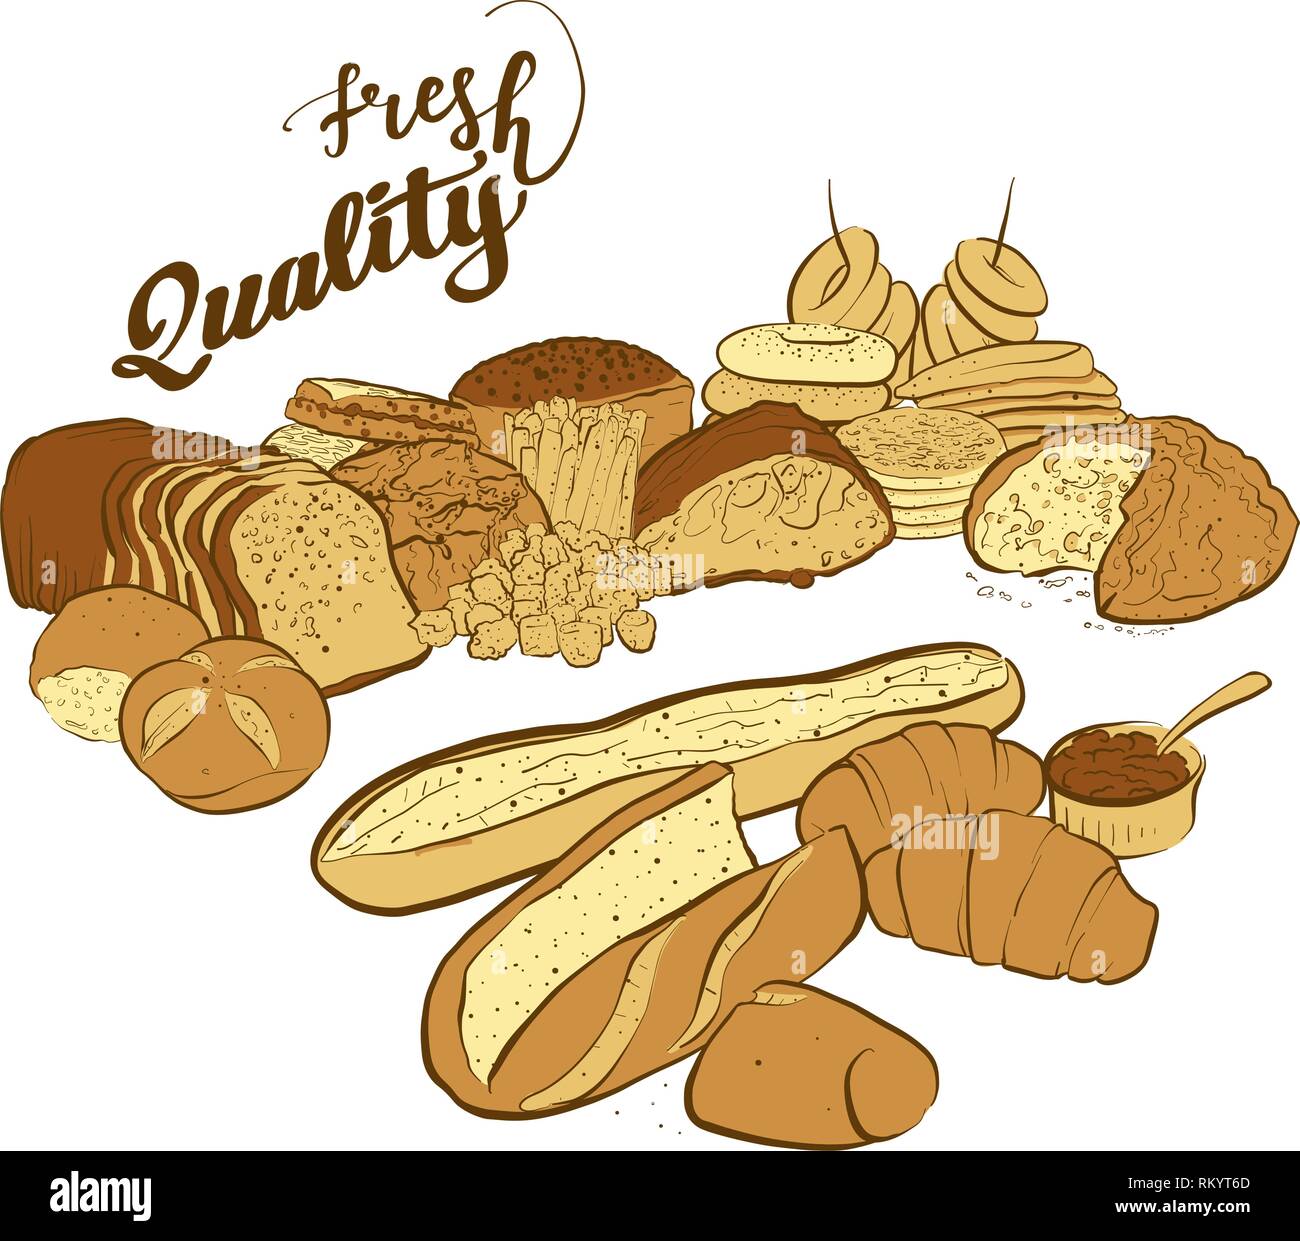 set of breads with fresh quality title, hand-drawn vector sketch Stock Vector